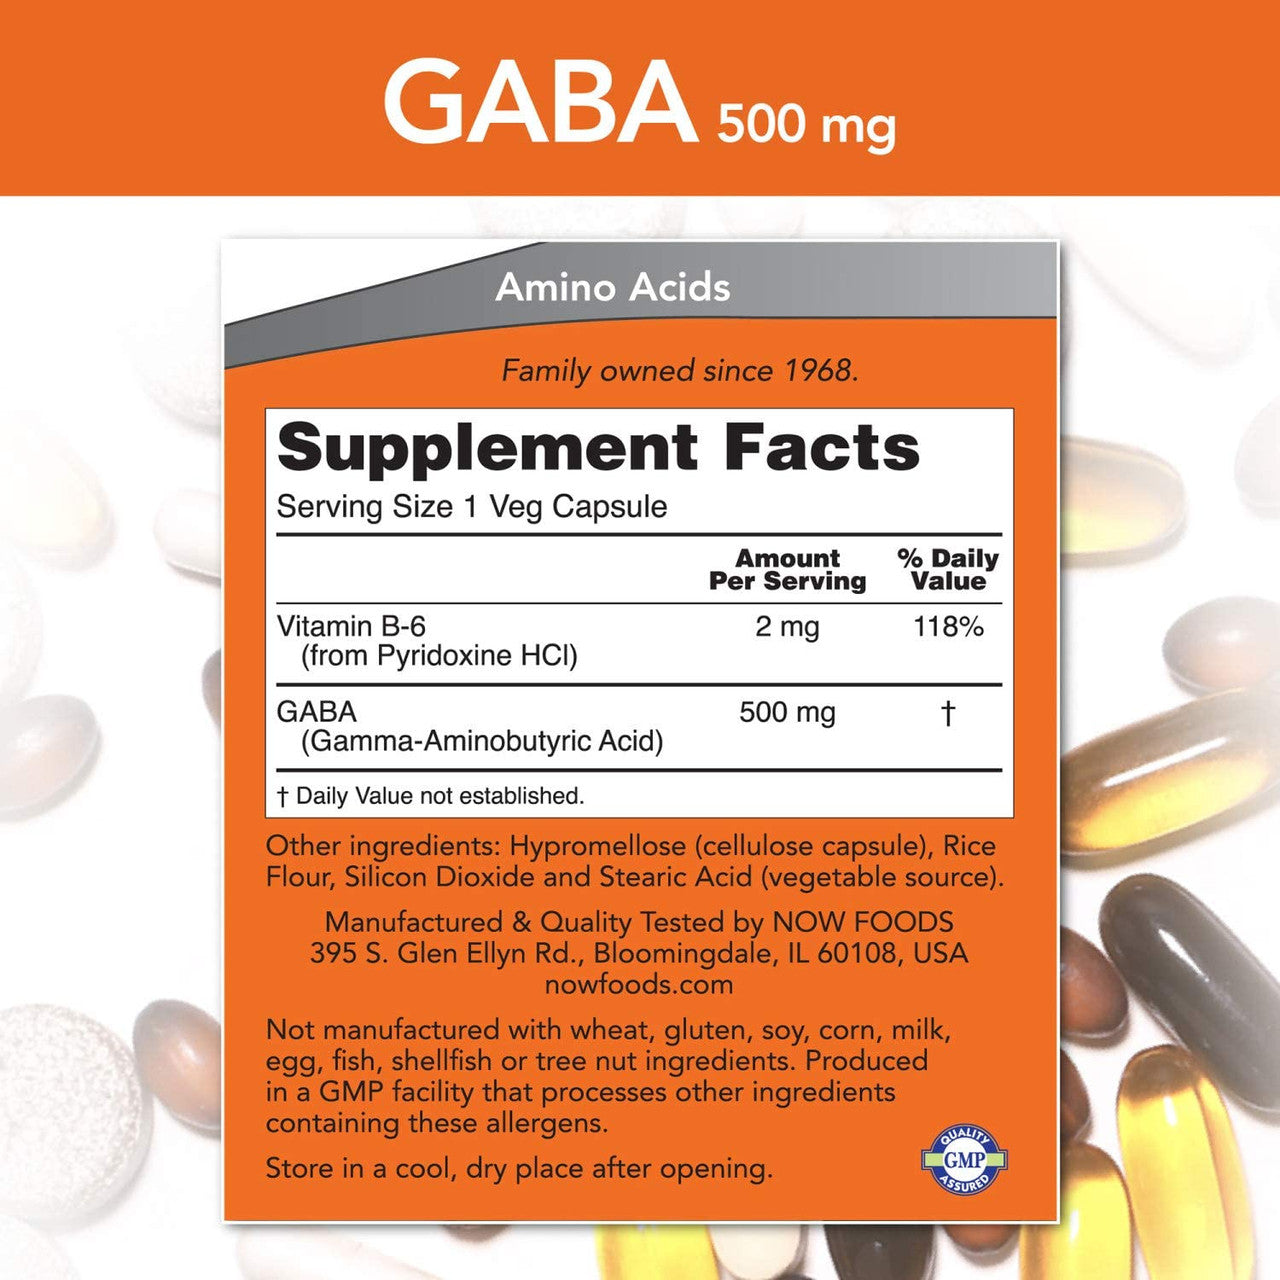 Now Gaba 500 MG supplement facts